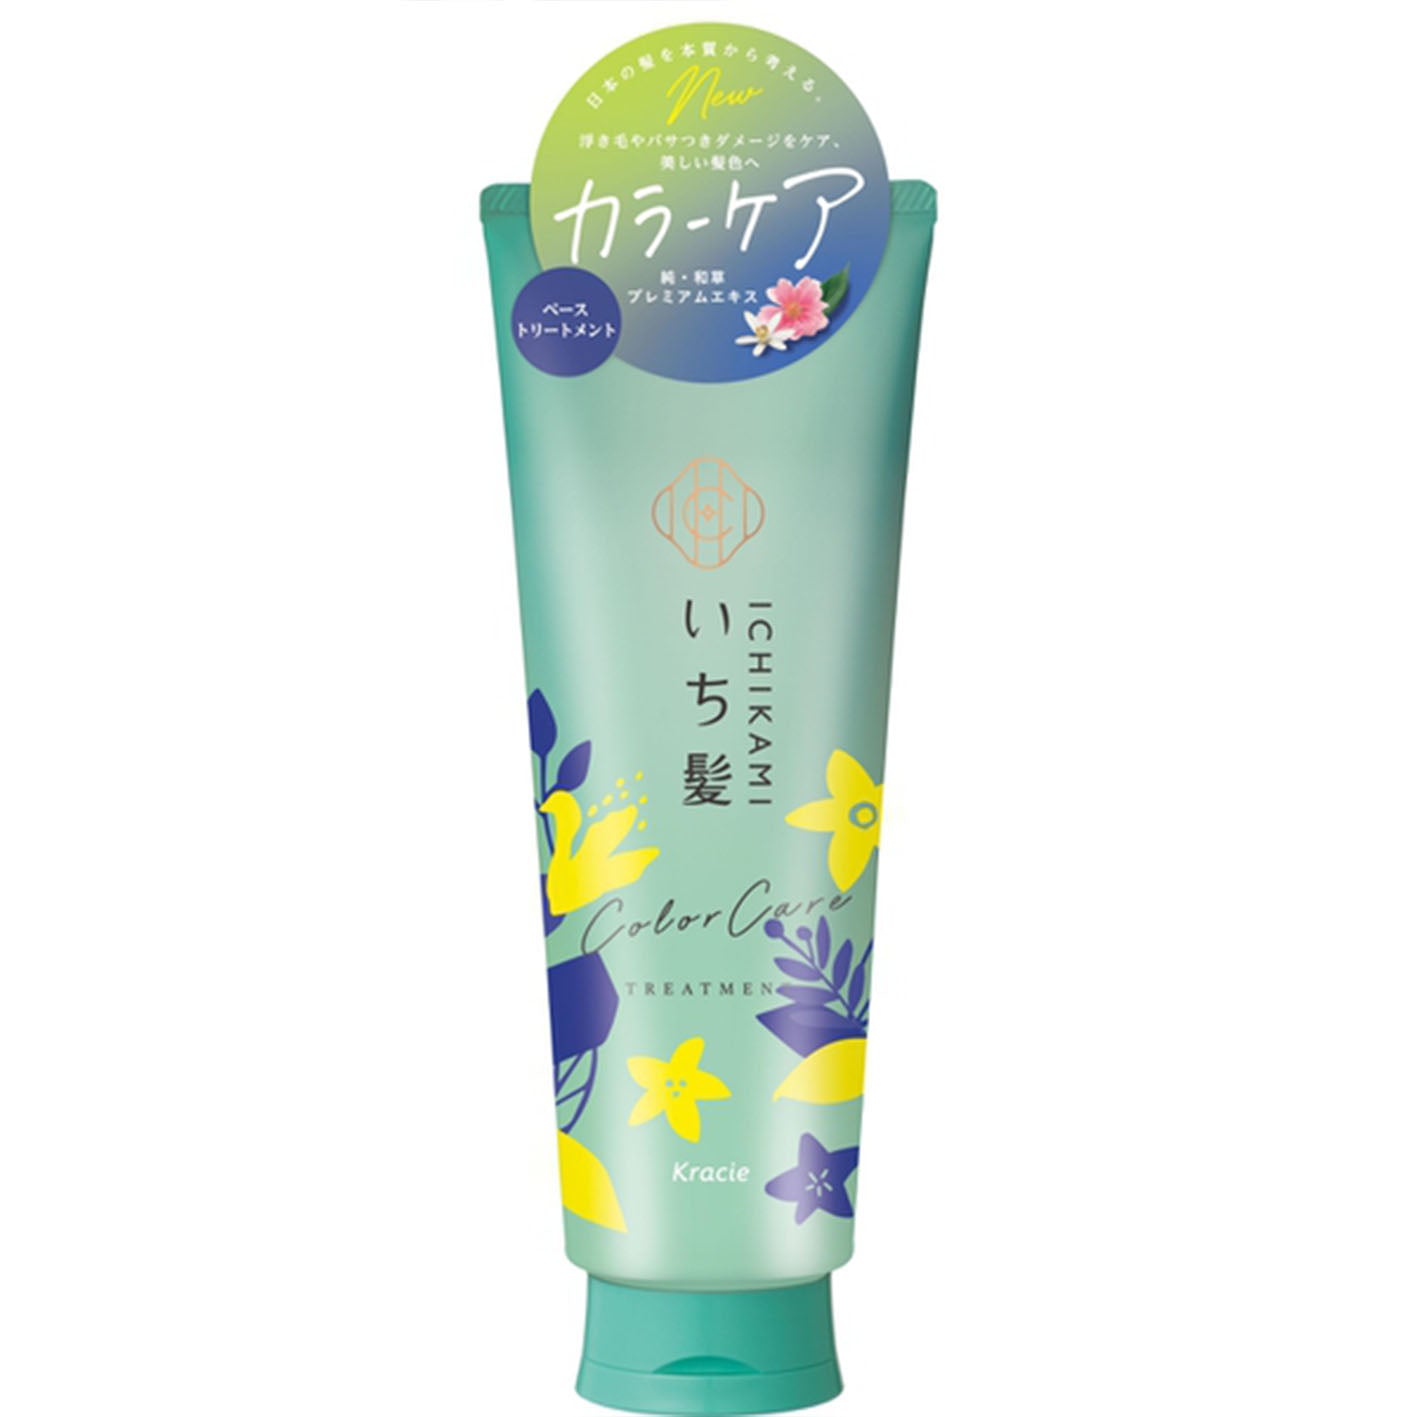 Ichikami Color Care Hair Treatment - 230g - Harajuku Culture Japan - Japanease Products Store Beauty and Stationery